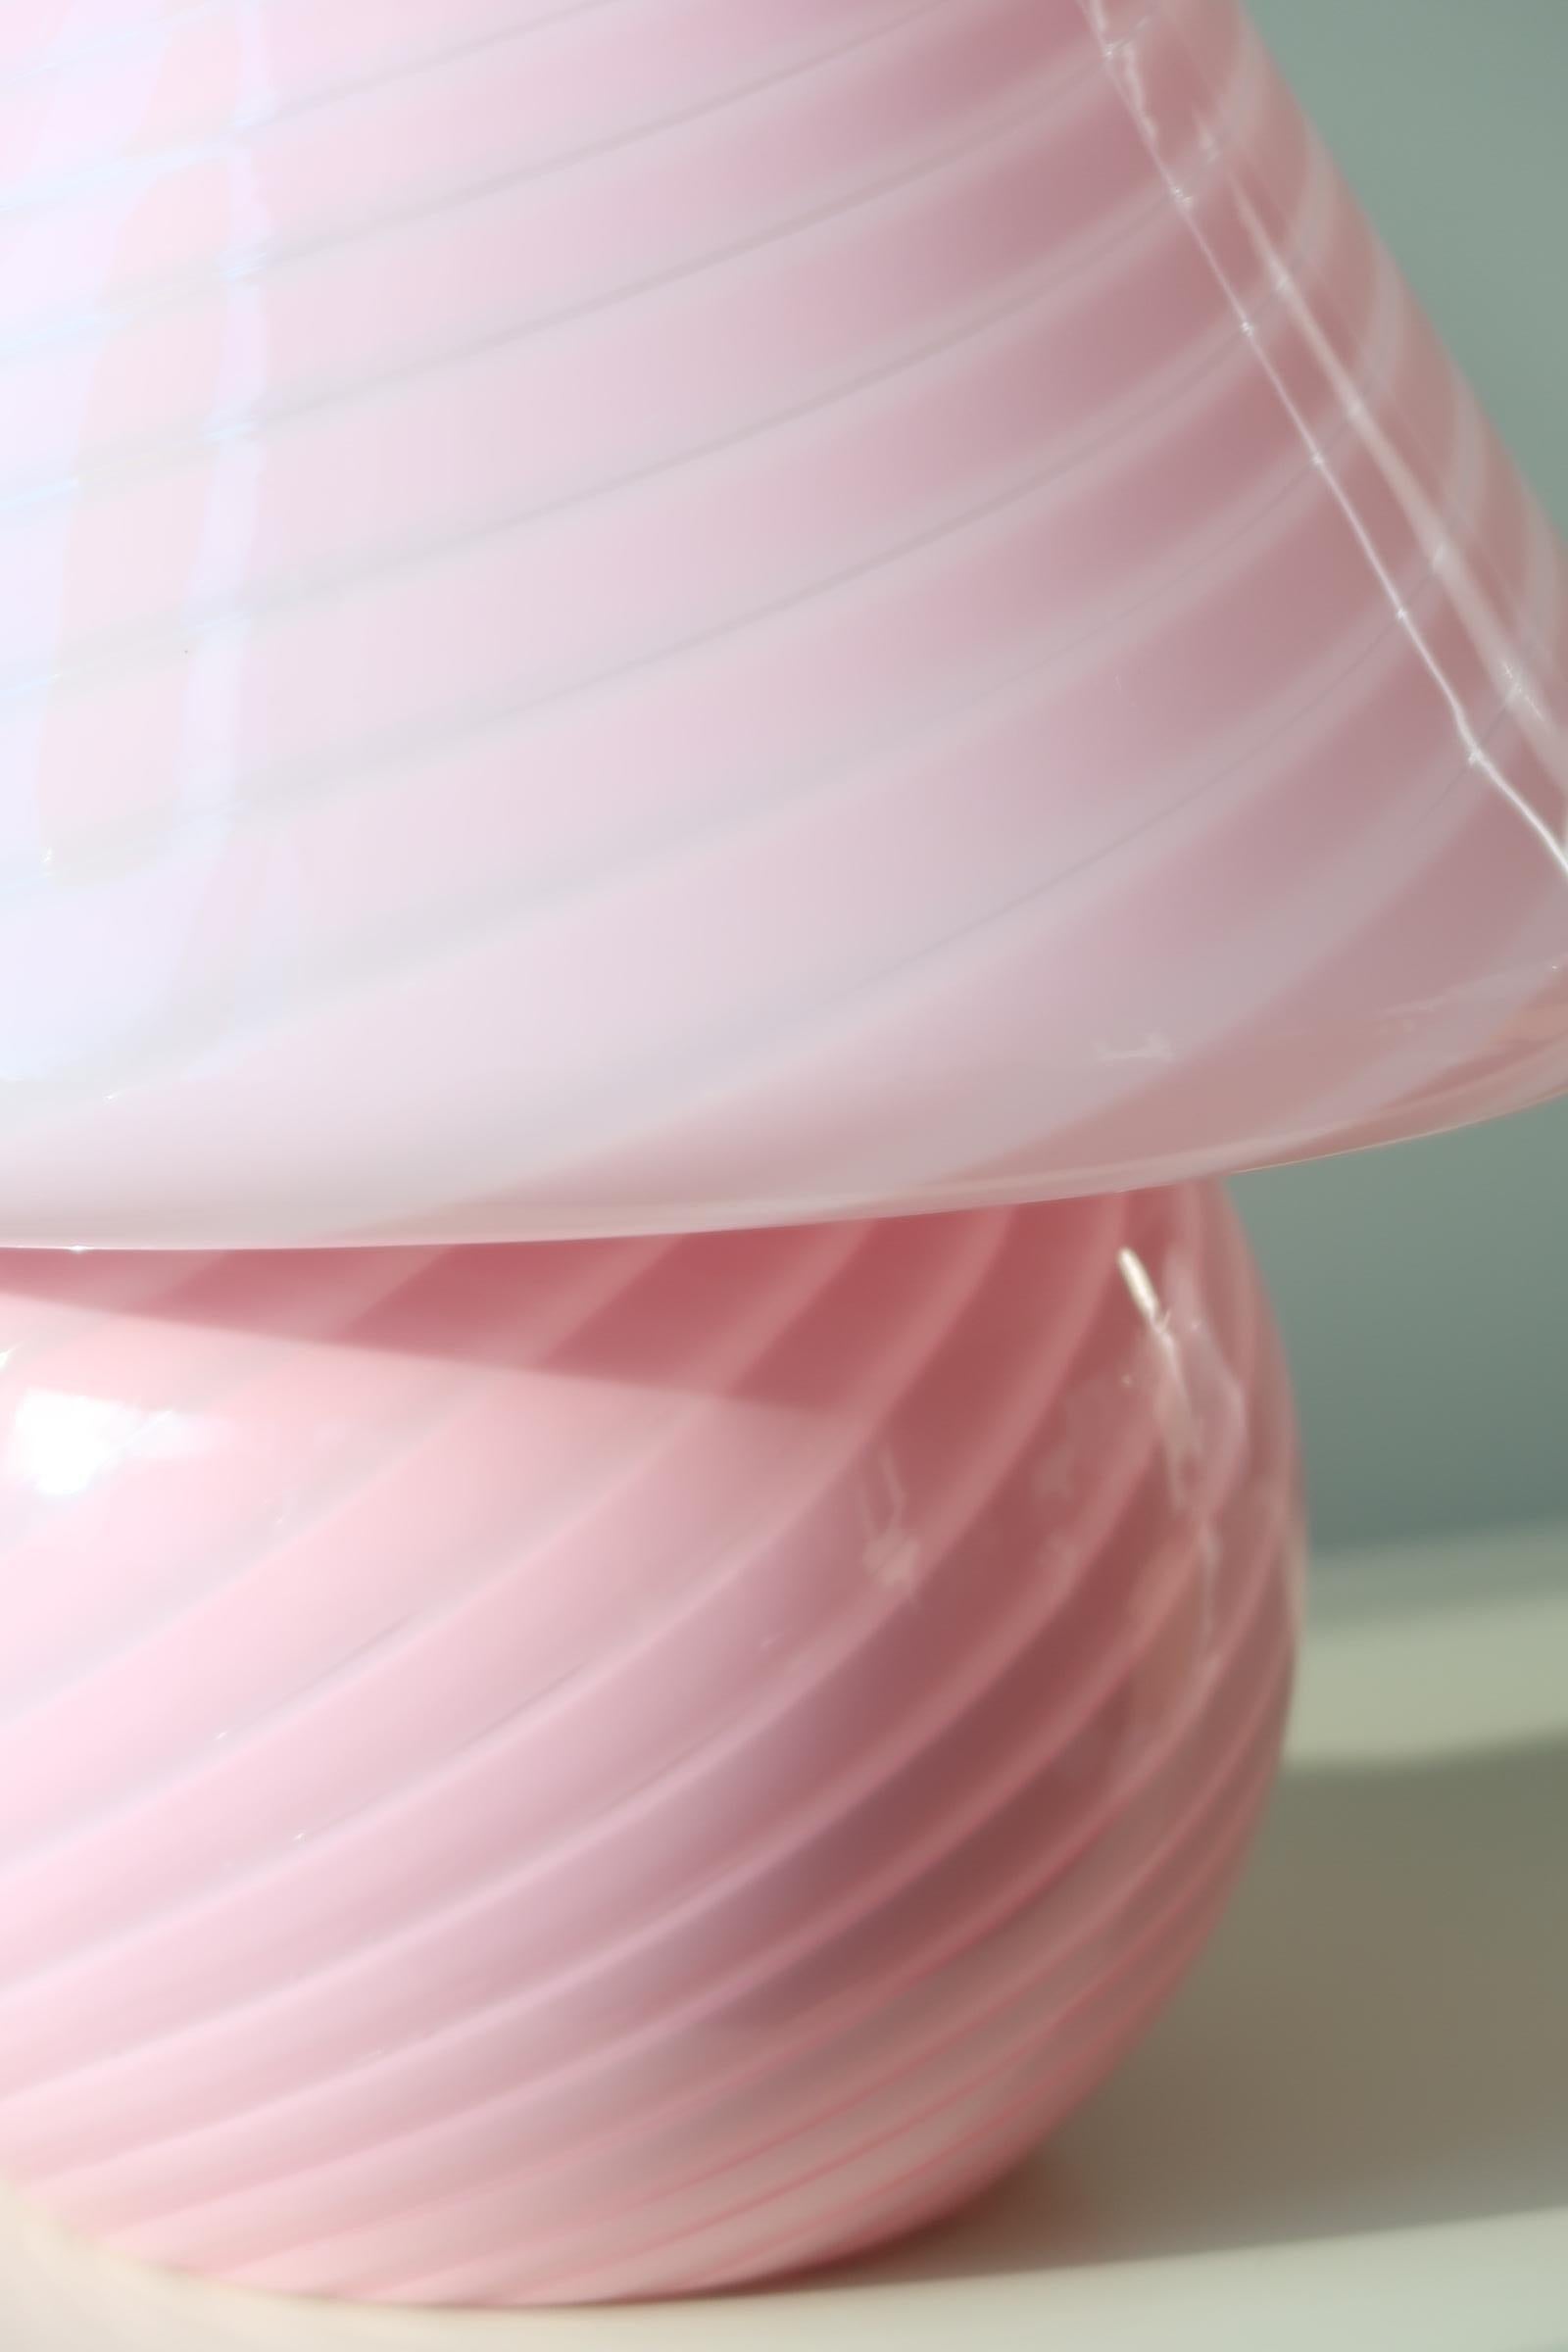 Extra large vintage Murano mushroom lamp in the most amazing pink / bubble gum shade. The lamp is mouth-blown in one piece of glass with a swirl and gives a really cozy light. Handmade in Italy, 1970s, and comes with new fabric cord.

Measures: